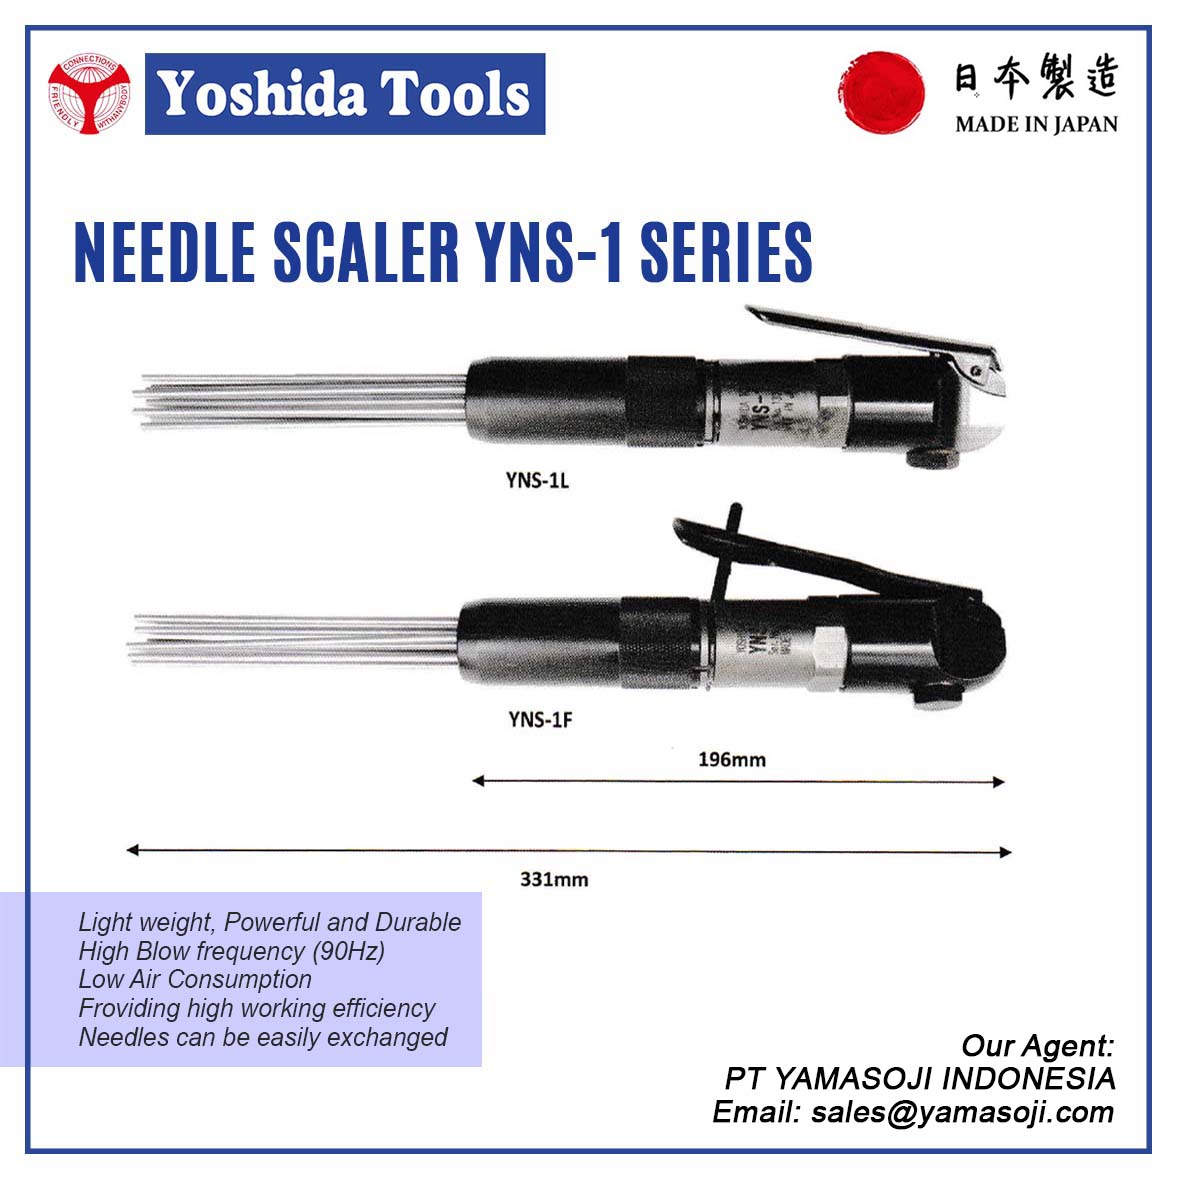 NEEDLE SCALER YNS-1 SERIES